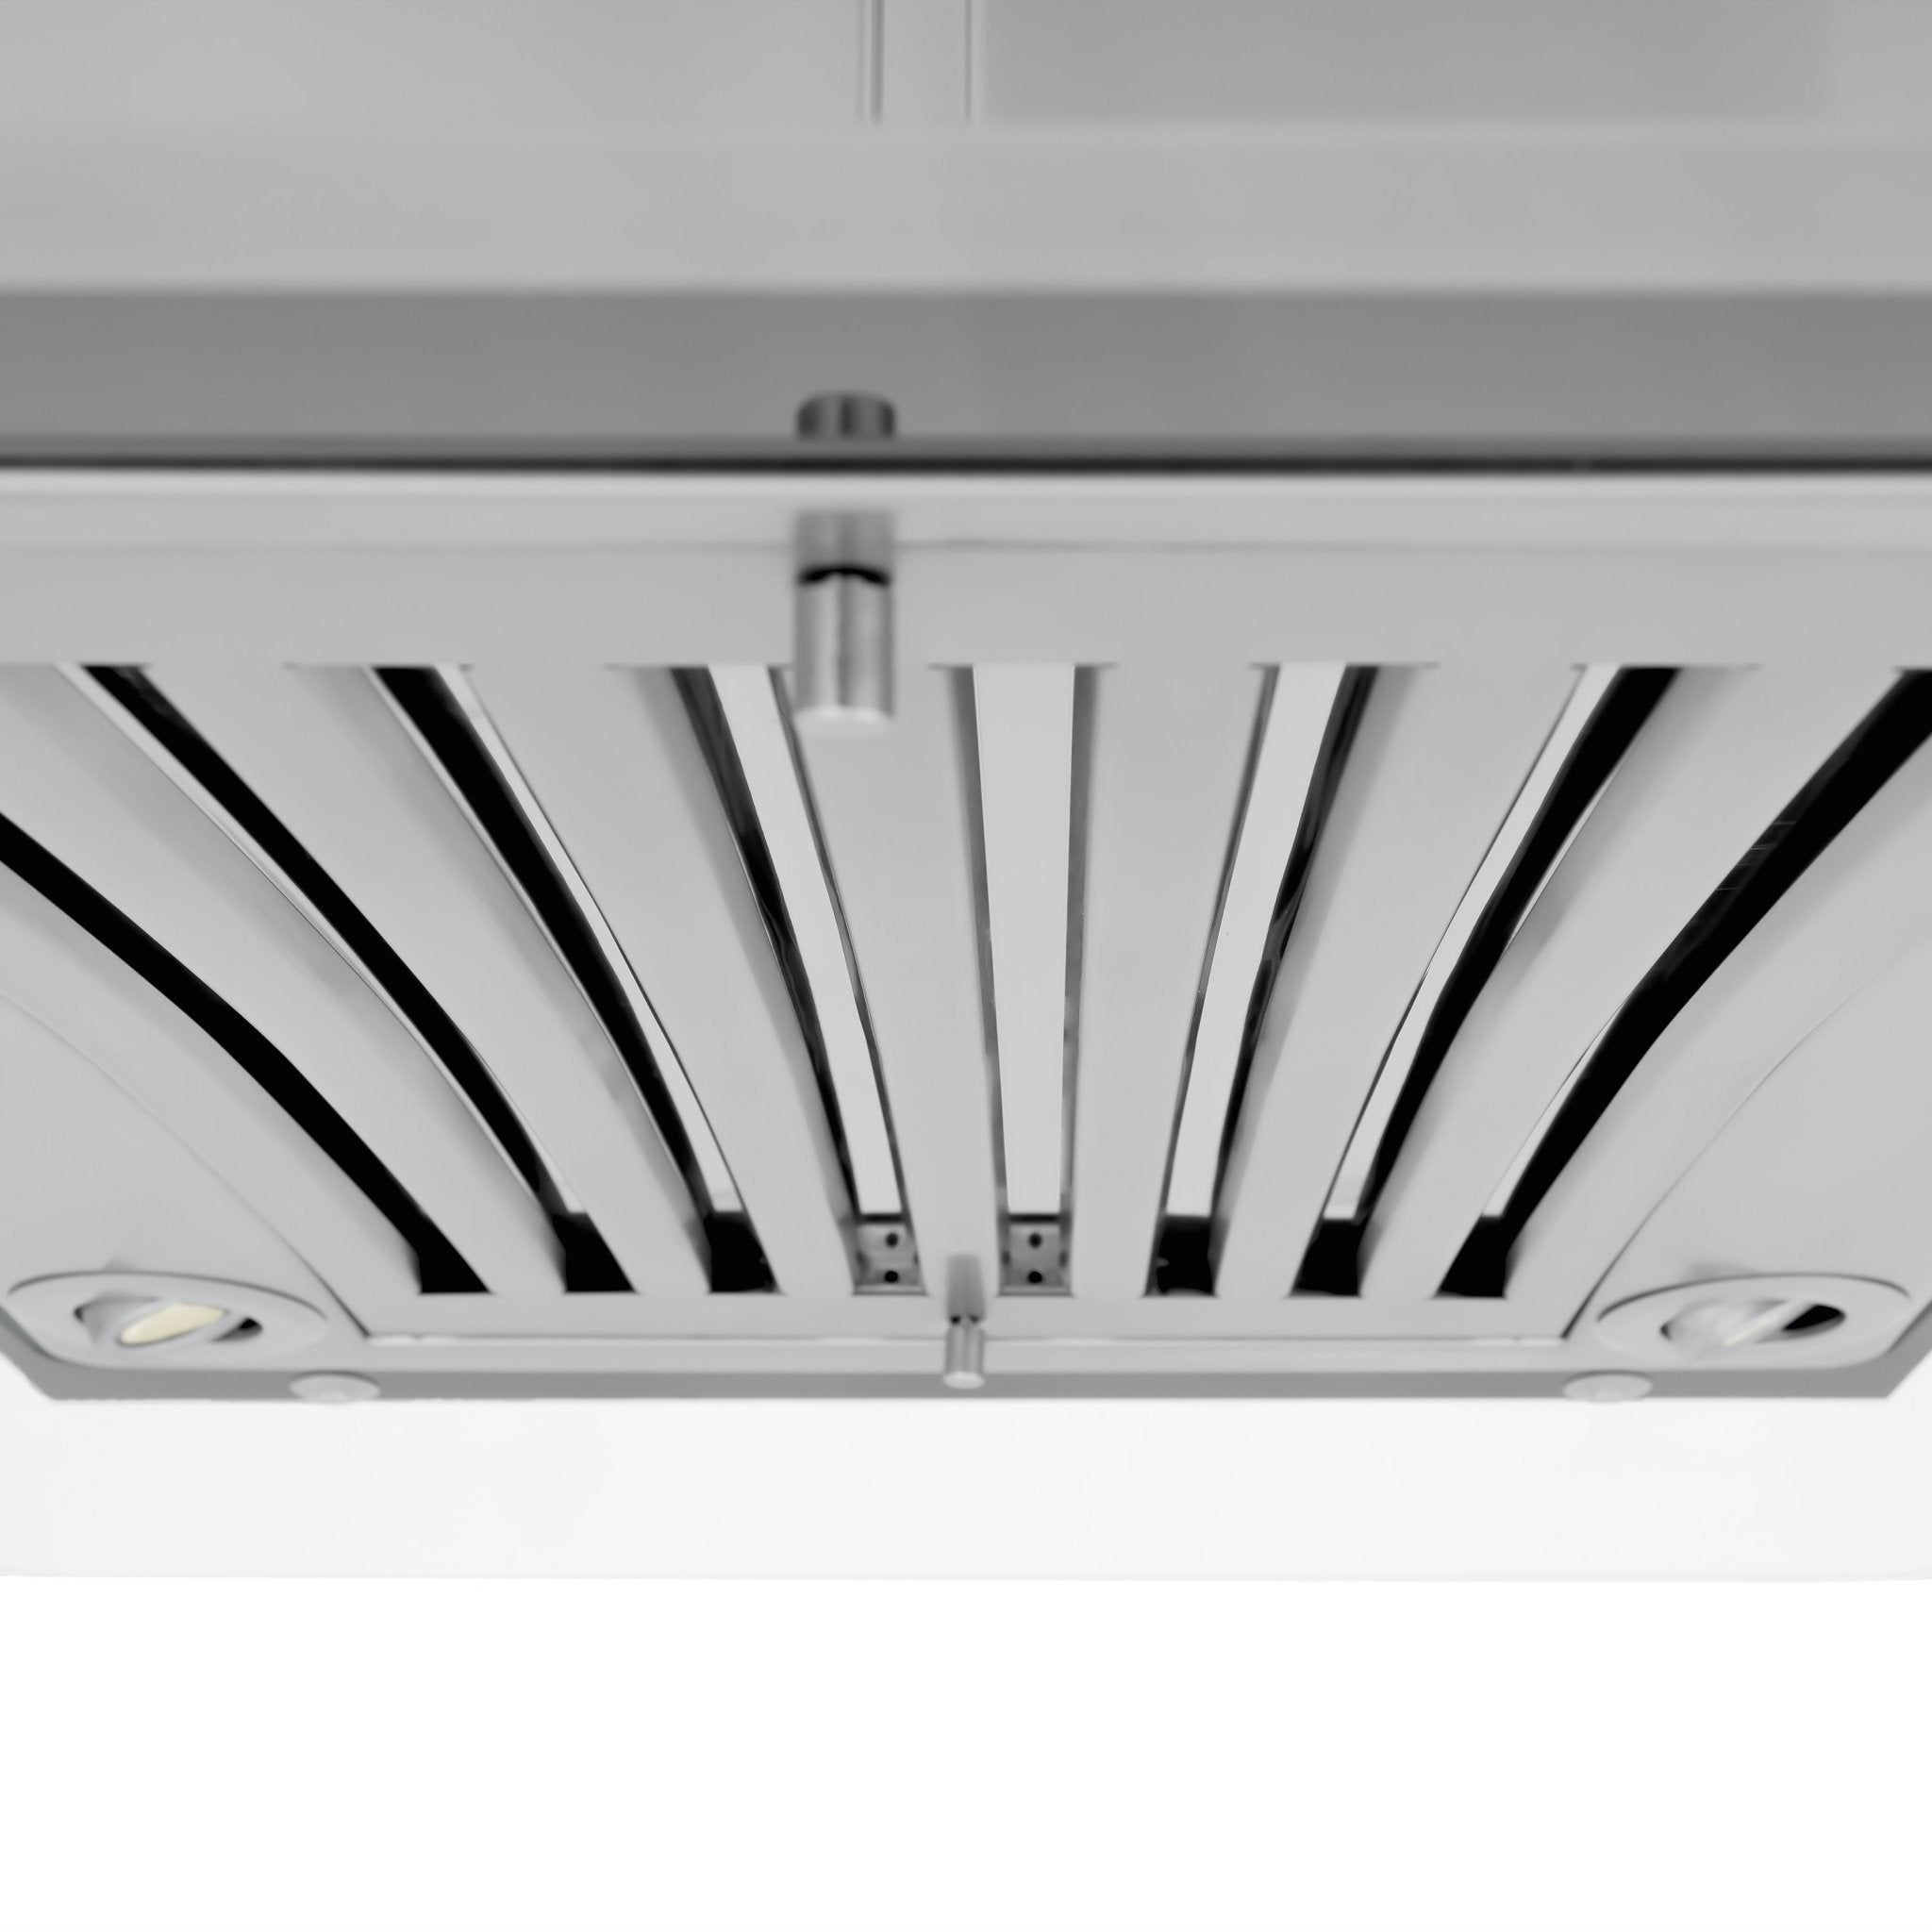 ZLINE Convertible Vent Island Mount Range Hood in Stainless Steel and Glass (GL9i) baffle filter closeup.